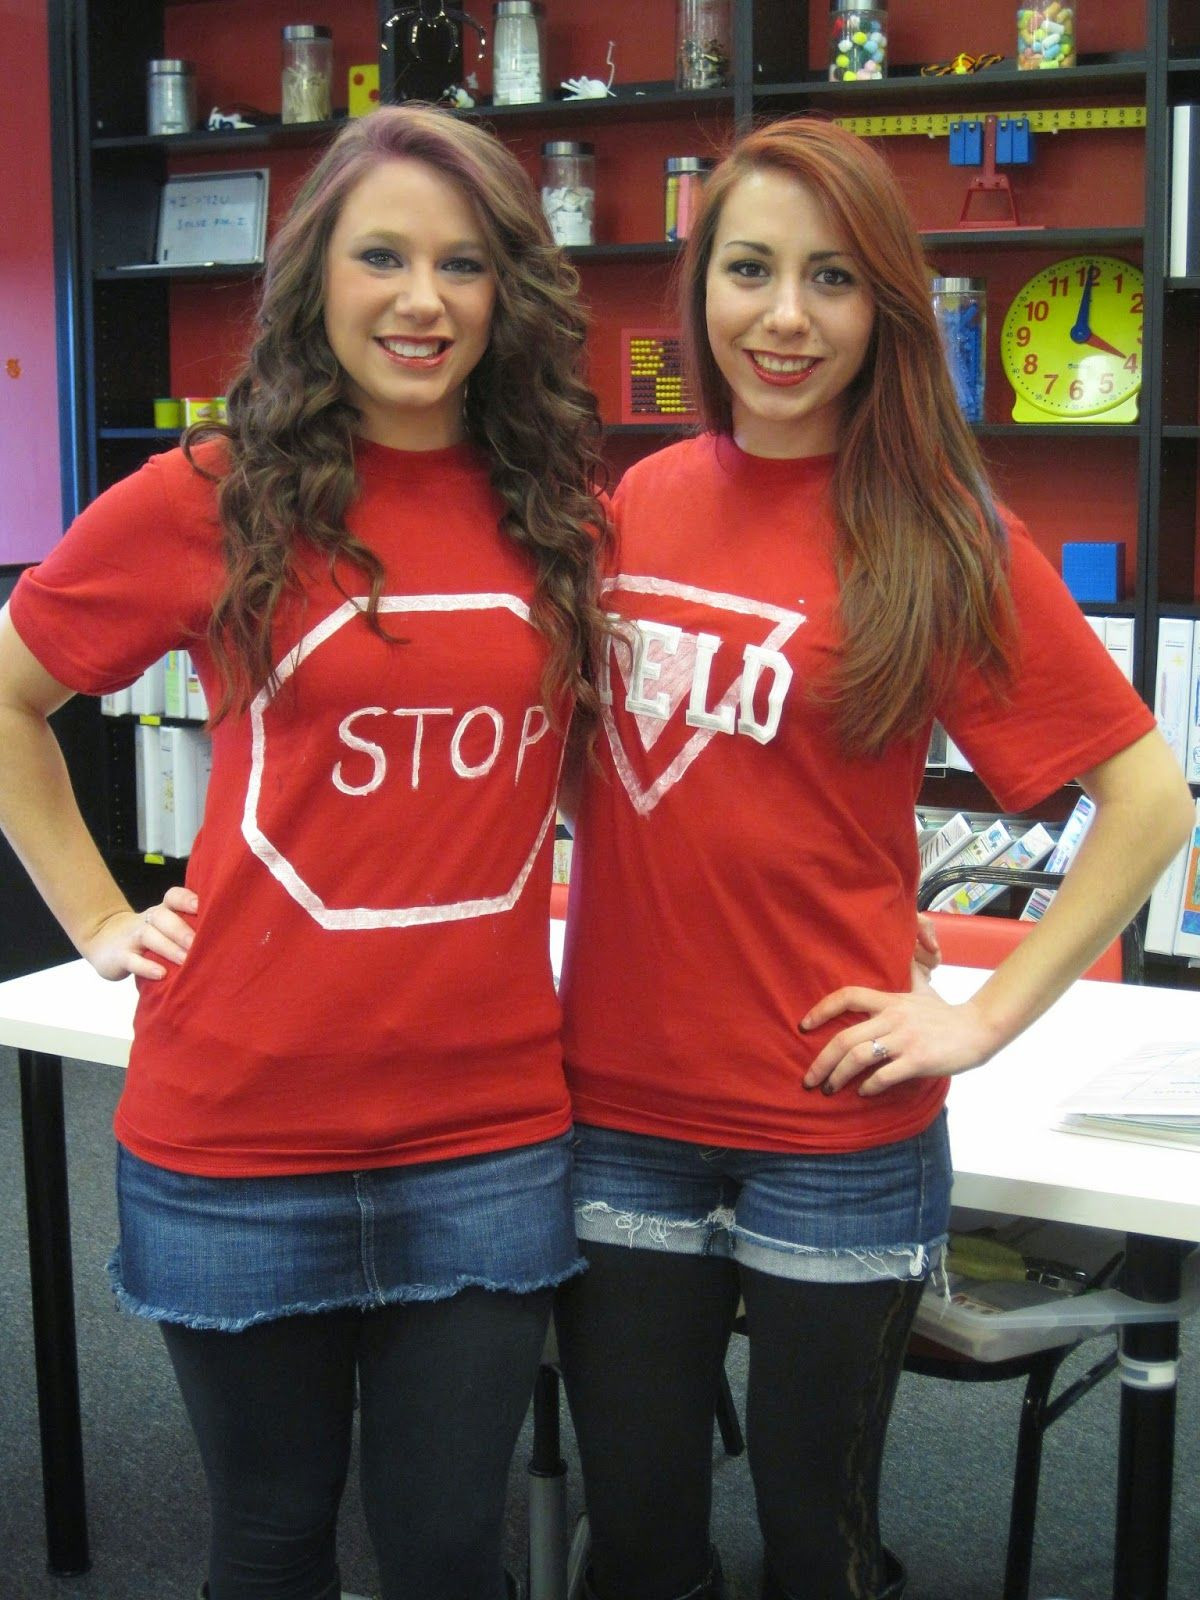 Pi Day Costume Ideas
 "Co Sines" Trigonometry and traffic signs — what a clever